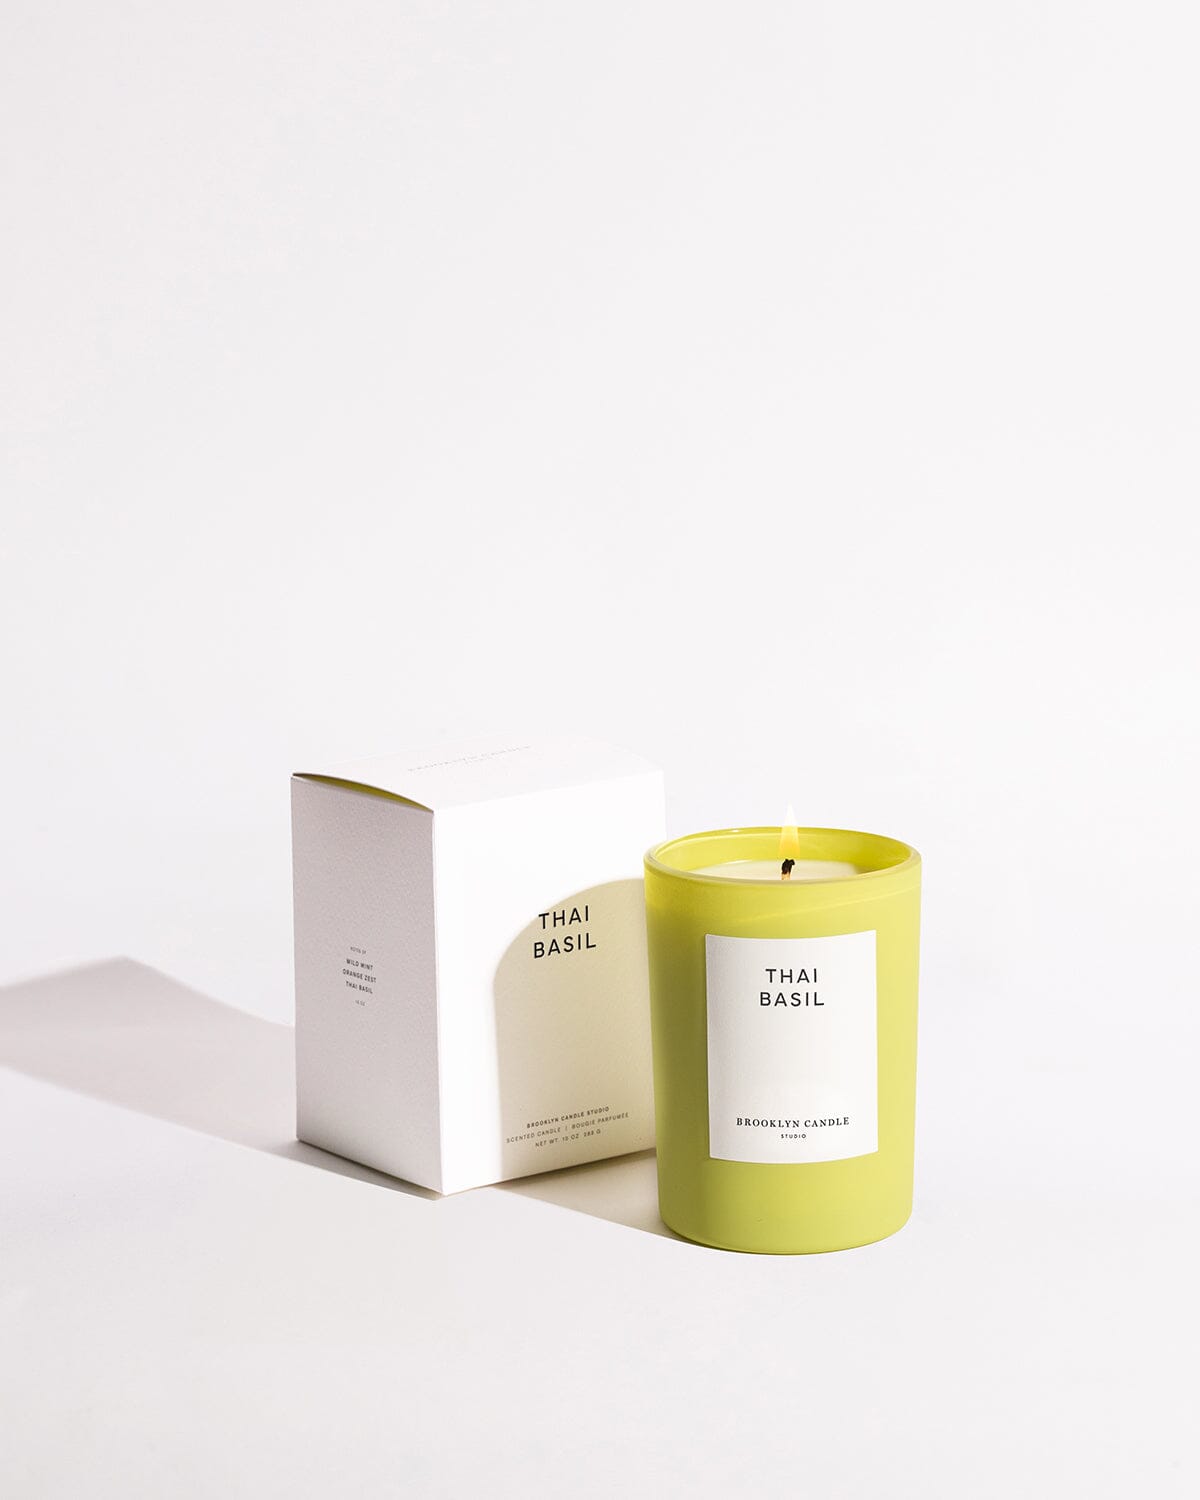 Thai Basil Summer Edition Candle Herbarium Collection Brooklyn Candle Studio 